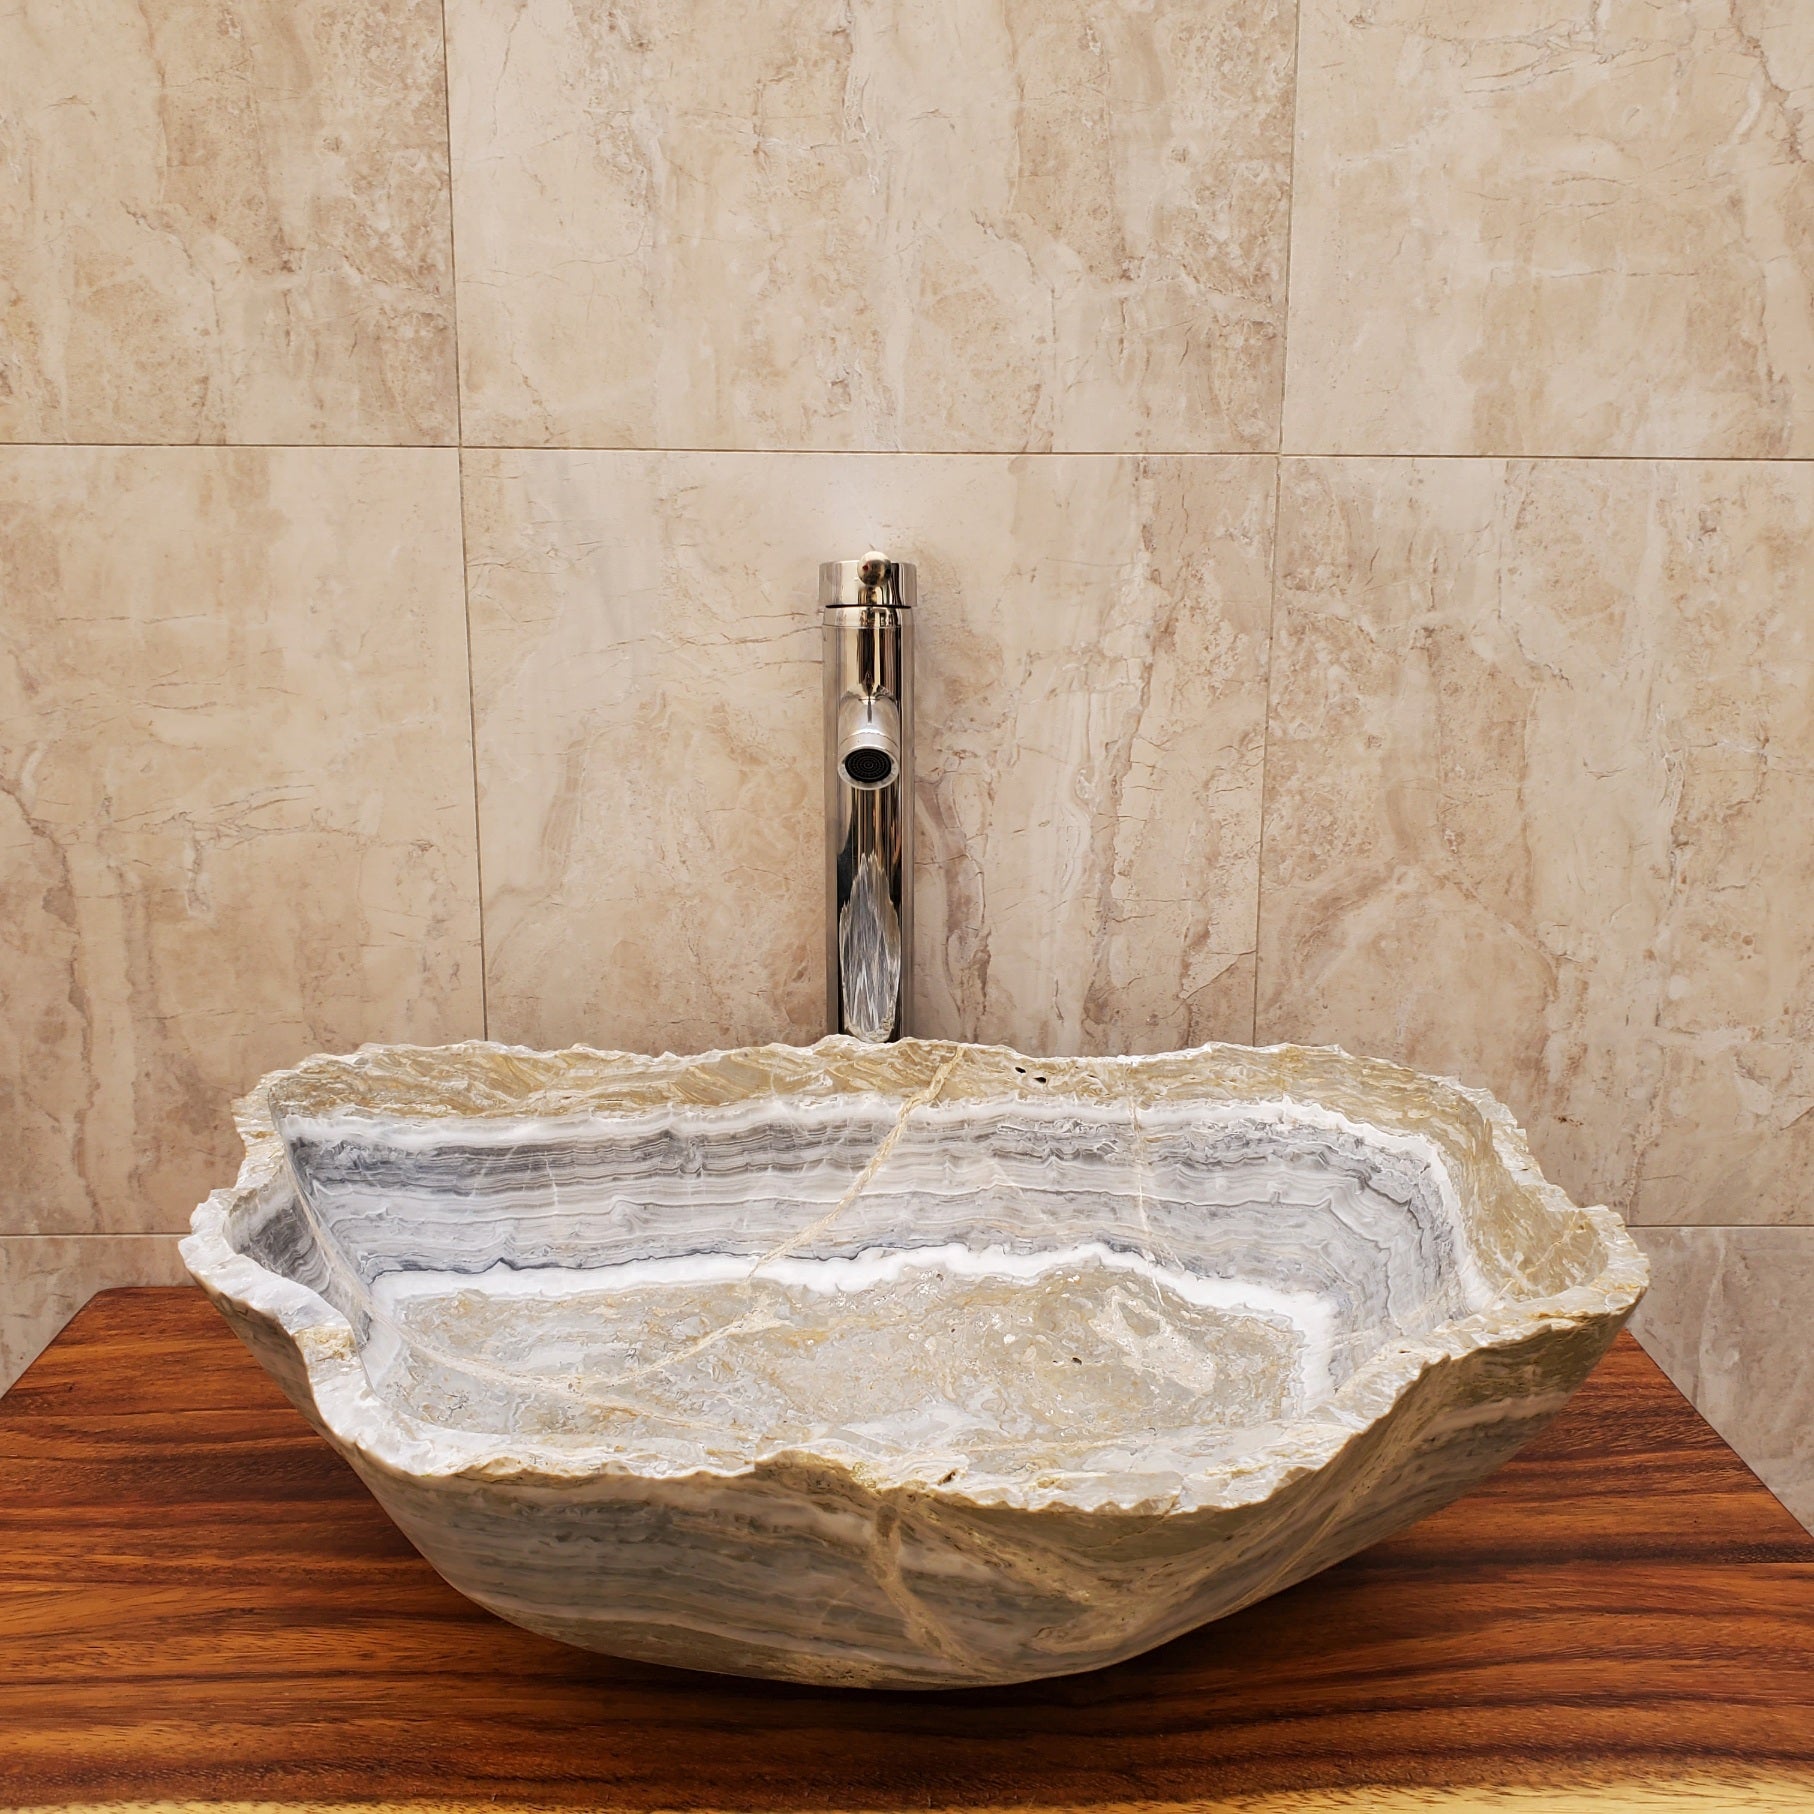 Gray, Light Brown, and White Onyx Vessel Sink. Handmade in Mexico. We hand finish and ship from the USA. Buy now at www.felipeandgrace.com. 